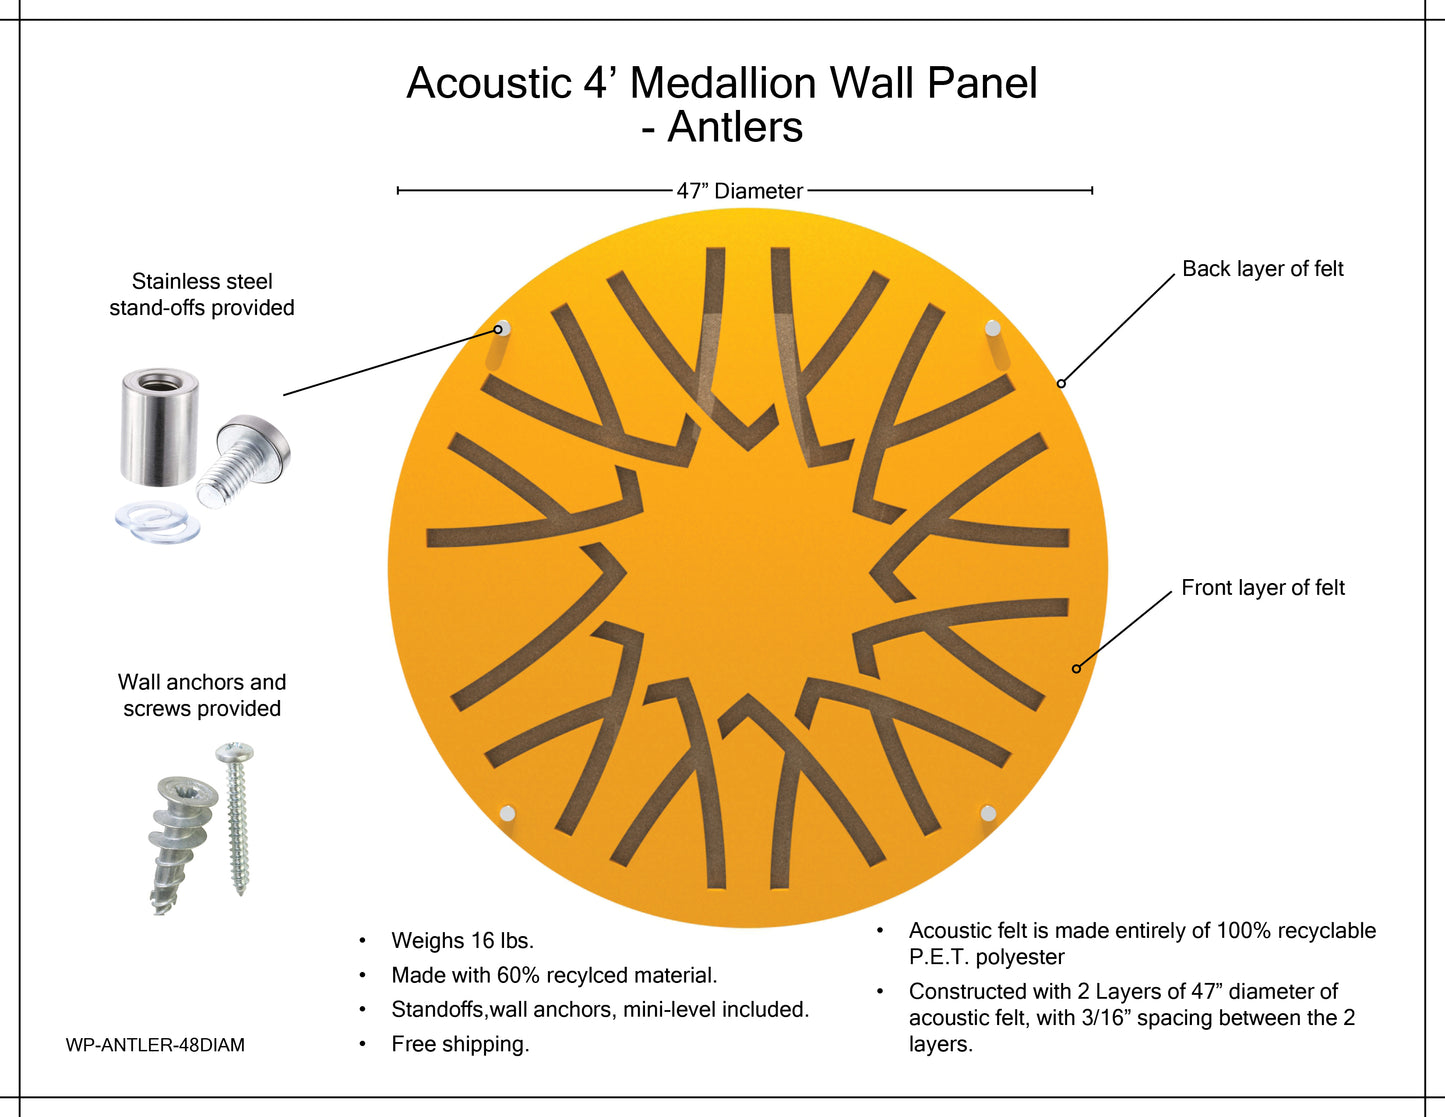 Medallion Acoustic Wall Panel - Antlers